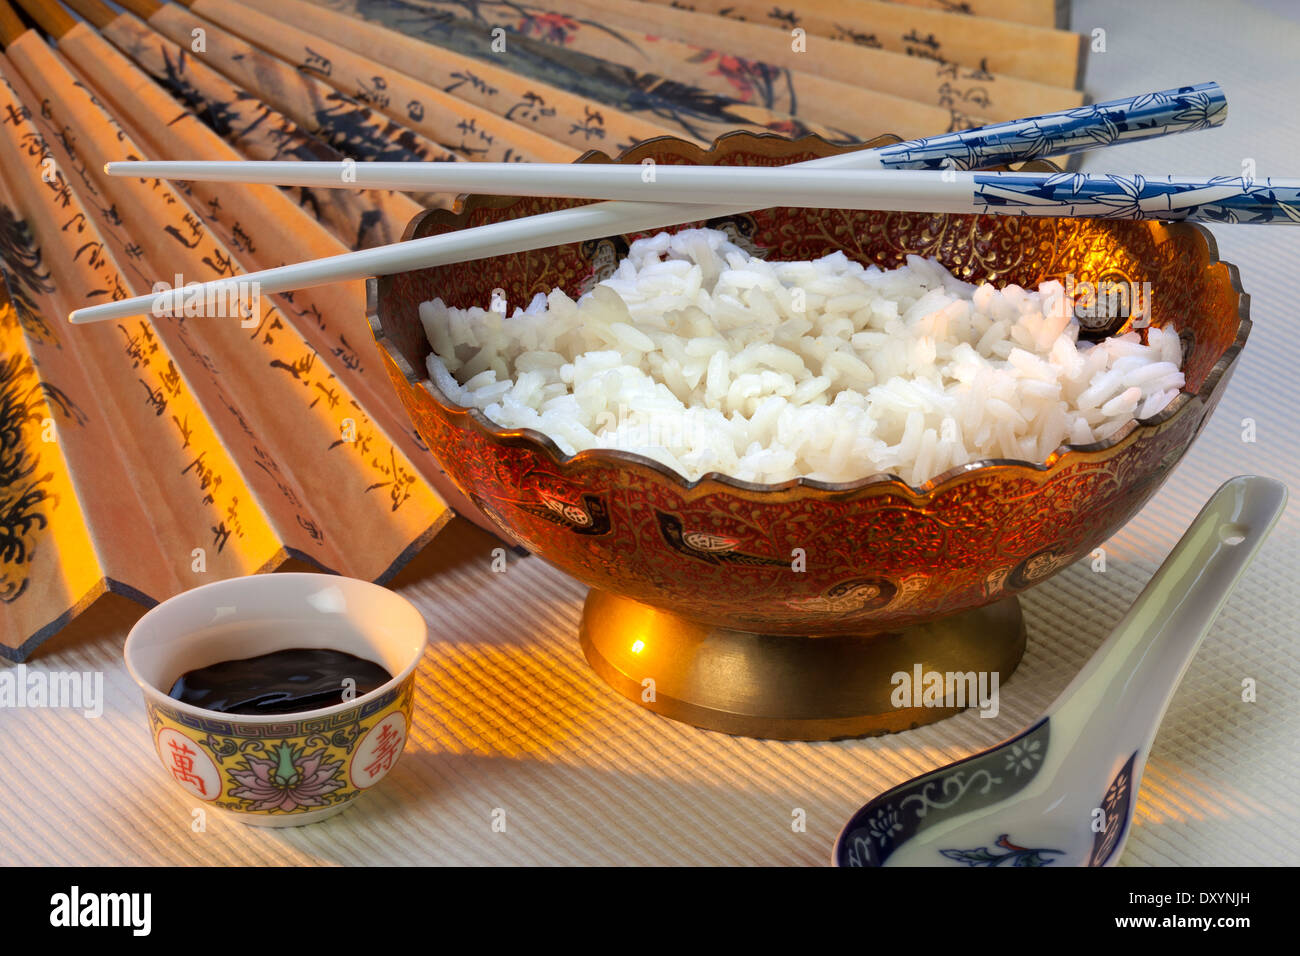 A bowl of rice with chopsticks Stock Photo